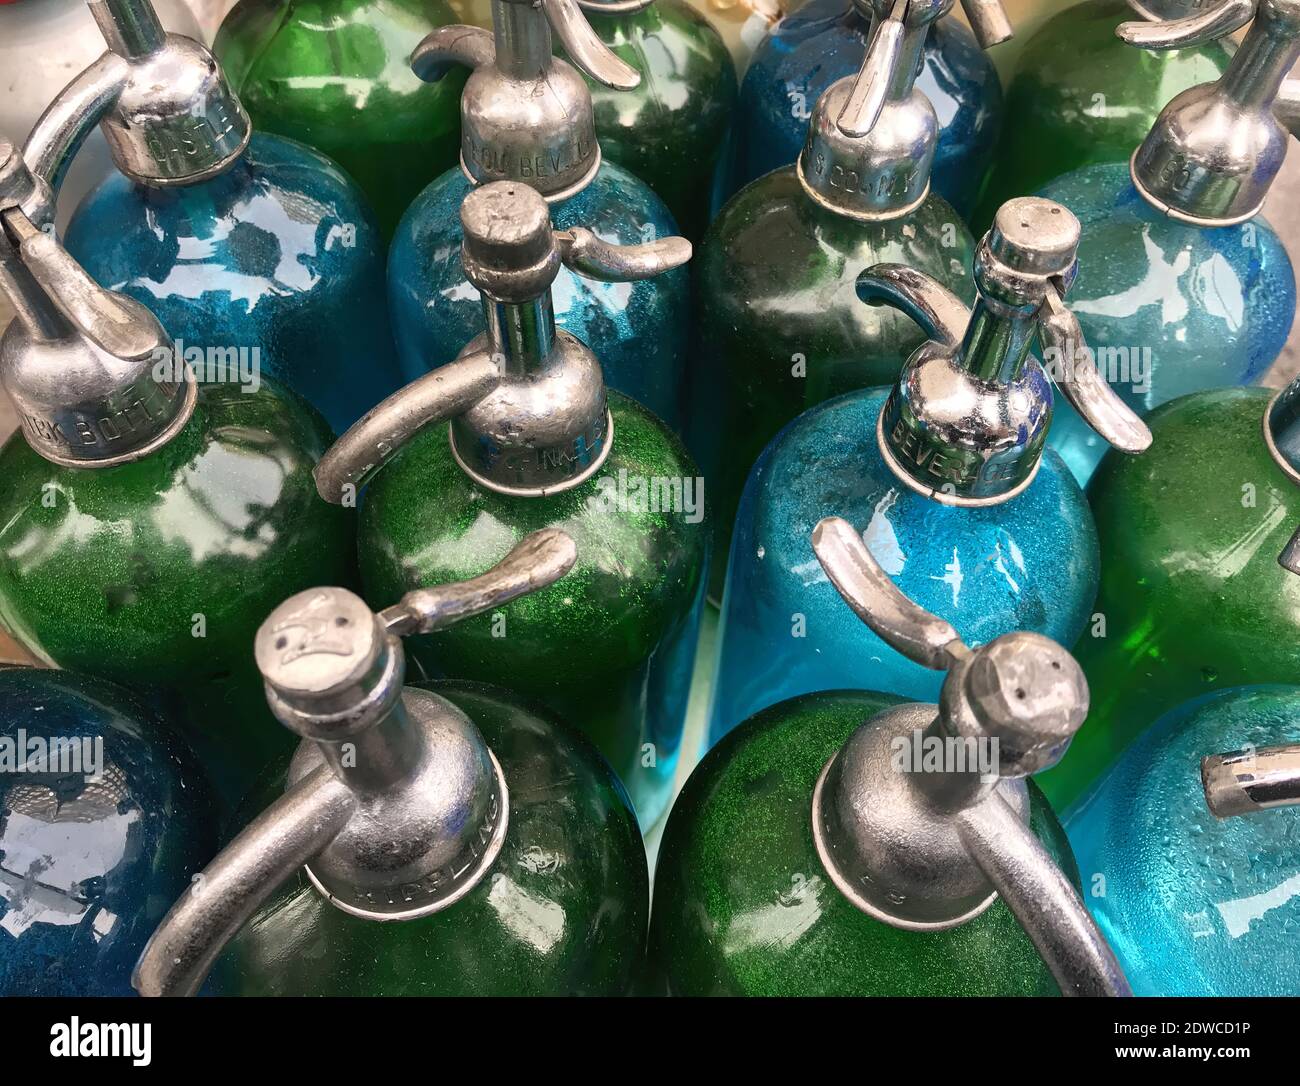 A photograph of a collection of blue and green glass antique seltzer bottles. Stock Photo